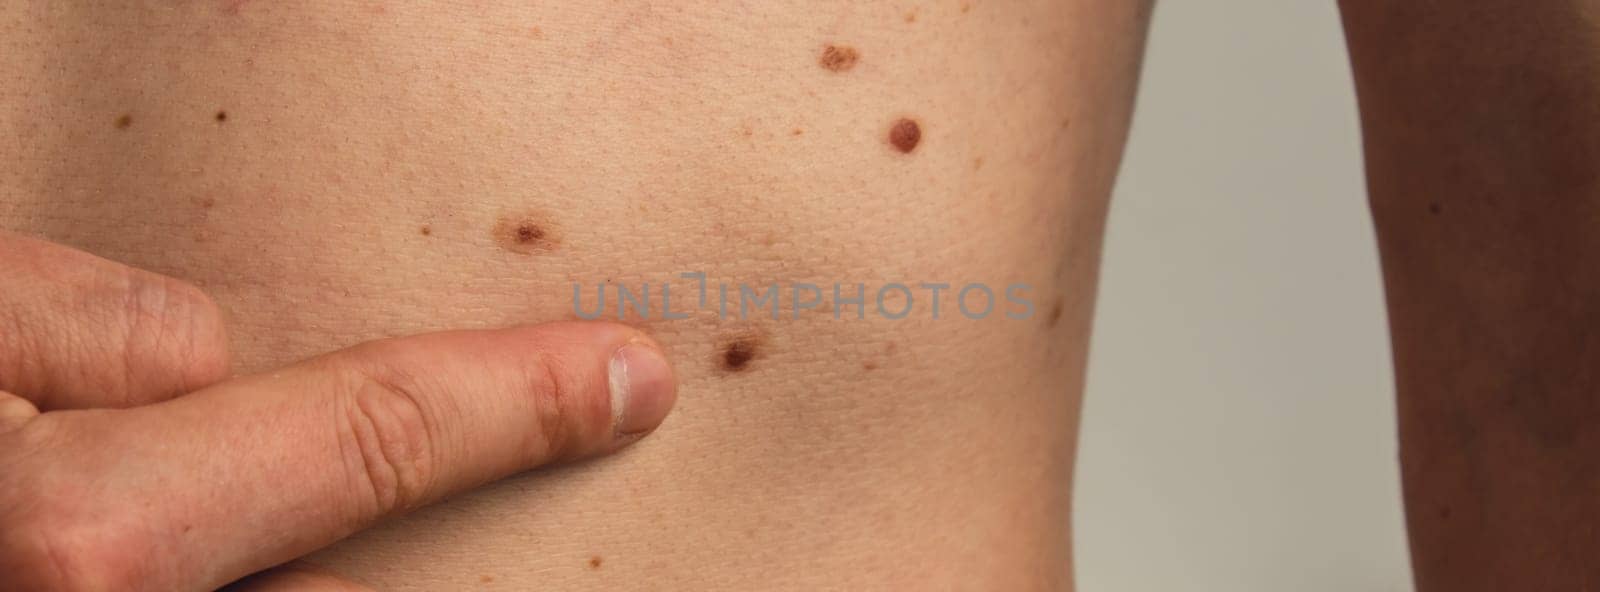 Male hand showing birthmarks on skin body stomach part. Close up detail of the bare skin. Health Effects of UV Radiation. Man with birthmarks Pigmentation by anna_stasiia